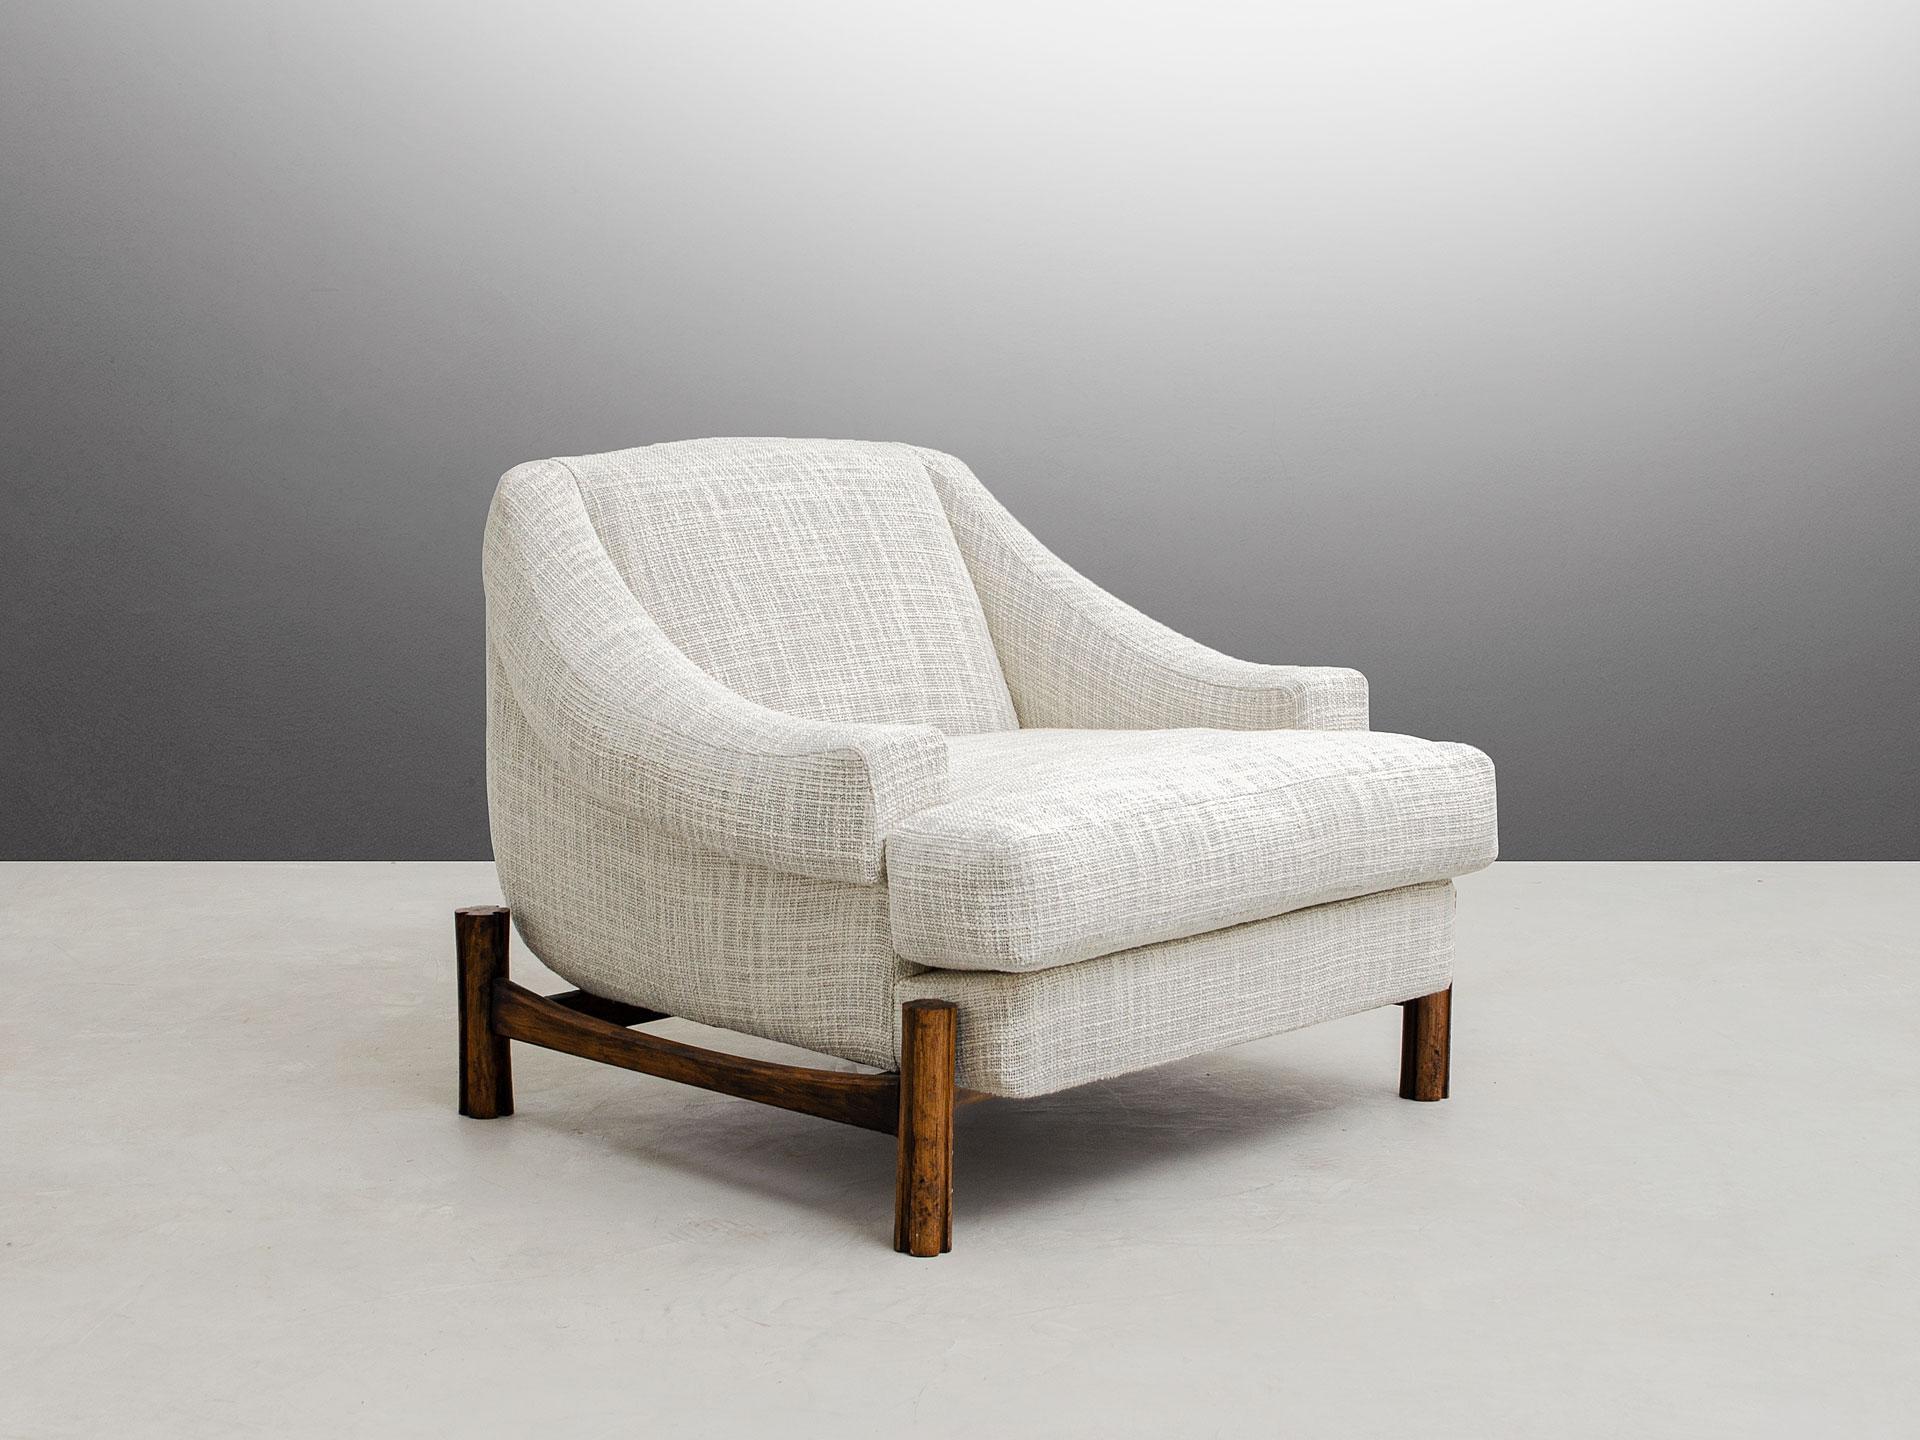 This amazing lounge chair is definitely an eyecatcher. The design of the beautiful wood structure combines beautifully the curve lines of the comfortable seat. This piece was restored by one of the best craftsmanship in São Paulo, Brazil. The light